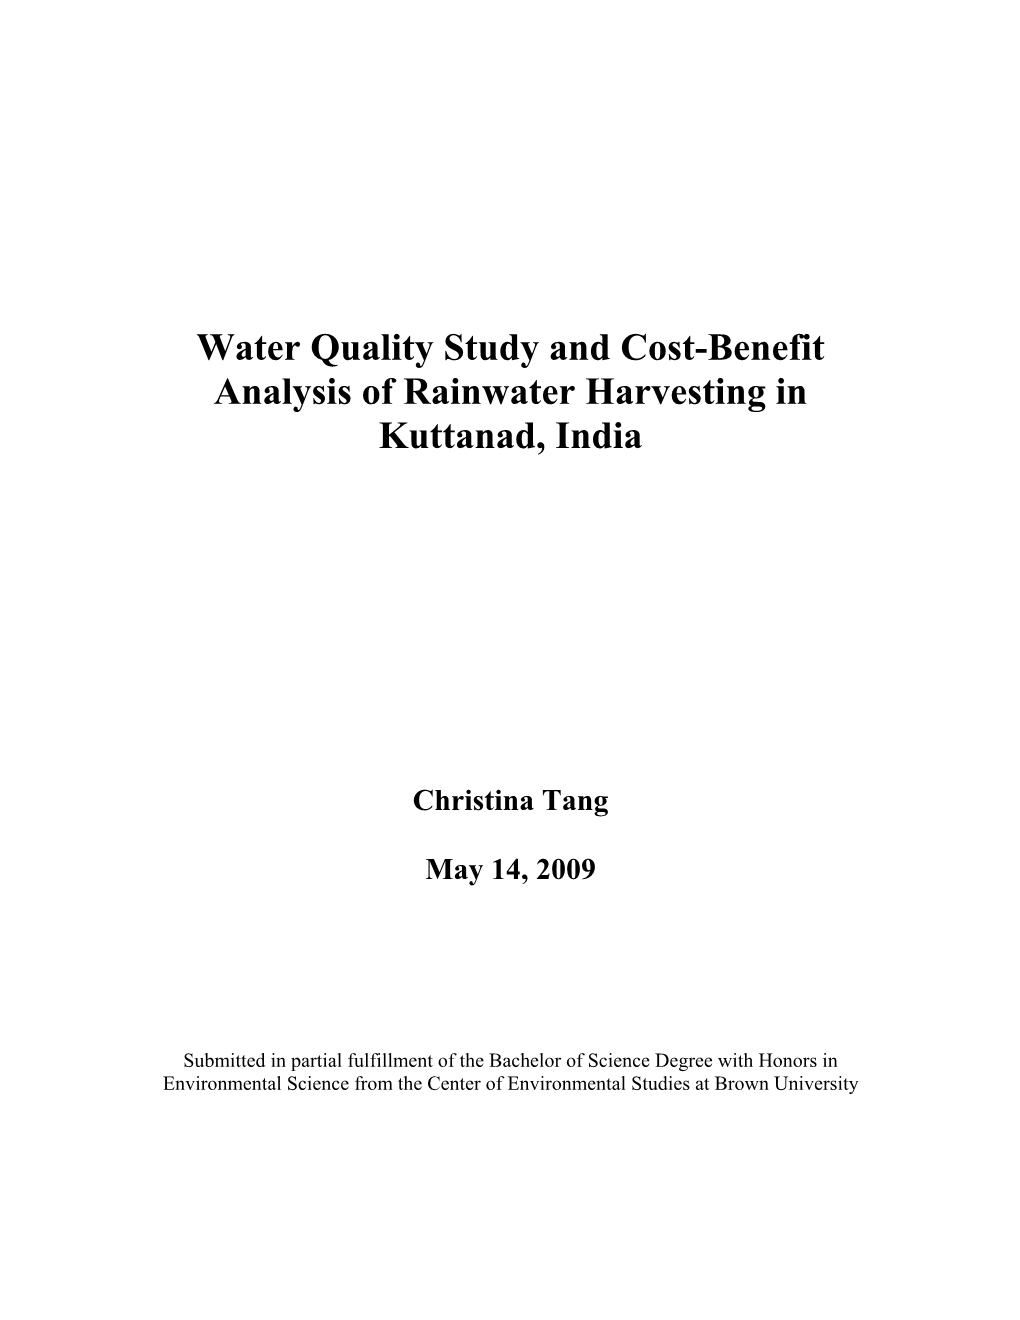 Water Quality Study and Cost-Benefit Analysis of Rainwater Harvesting in Kuttanad, India